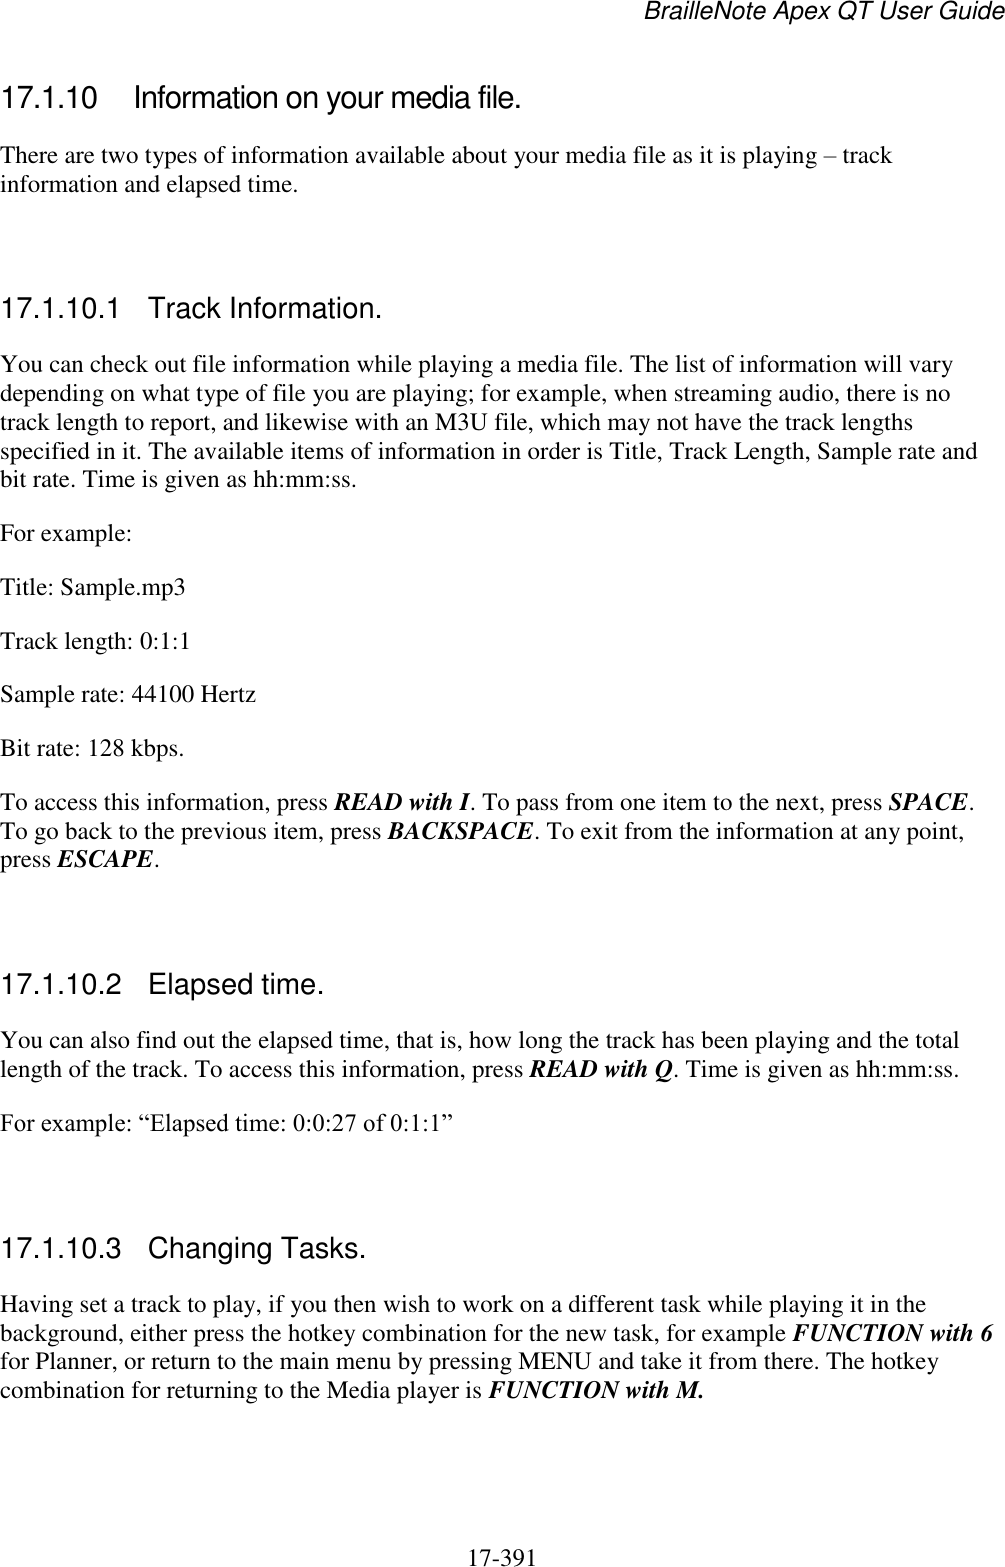 BrailleNote Apex QT User Guide  17-391   17.1.10  Information on your media file. There are two types of information available about your media file as it is playing – track information and elapsed time.   17.1.10.1  Track Information. You can check out file information while playing a media file. The list of information will vary depending on what type of file you are playing; for example, when streaming audio, there is no track length to report, and likewise with an M3U file, which may not have the track lengths specified in it. The available items of information in order is Title, Track Length, Sample rate and bit rate. Time is given as hh:mm:ss. For example: Title: Sample.mp3 Track length: 0:1:1 Sample rate: 44100 Hertz Bit rate: 128 kbps. To access this information, press READ with I. To pass from one item to the next, press SPACE. To go back to the previous item, press BACKSPACE. To exit from the information at any point, press ESCAPE.   17.1.10.2  Elapsed time. You can also find out the elapsed time, that is, how long the track has been playing and the total length of the track. To access this information, press READ with Q. Time is given as hh:mm:ss. For example: “Elapsed time: 0:0:27 of 0:1:1”   17.1.10.3  Changing Tasks. Having set a track to play, if you then wish to work on a different task while playing it in the background, either press the hotkey combination for the new task, for example FUNCTION with 6 for Planner, or return to the main menu by pressing MENU and take it from there. The hotkey combination for returning to the Media player is FUNCTION with M.   